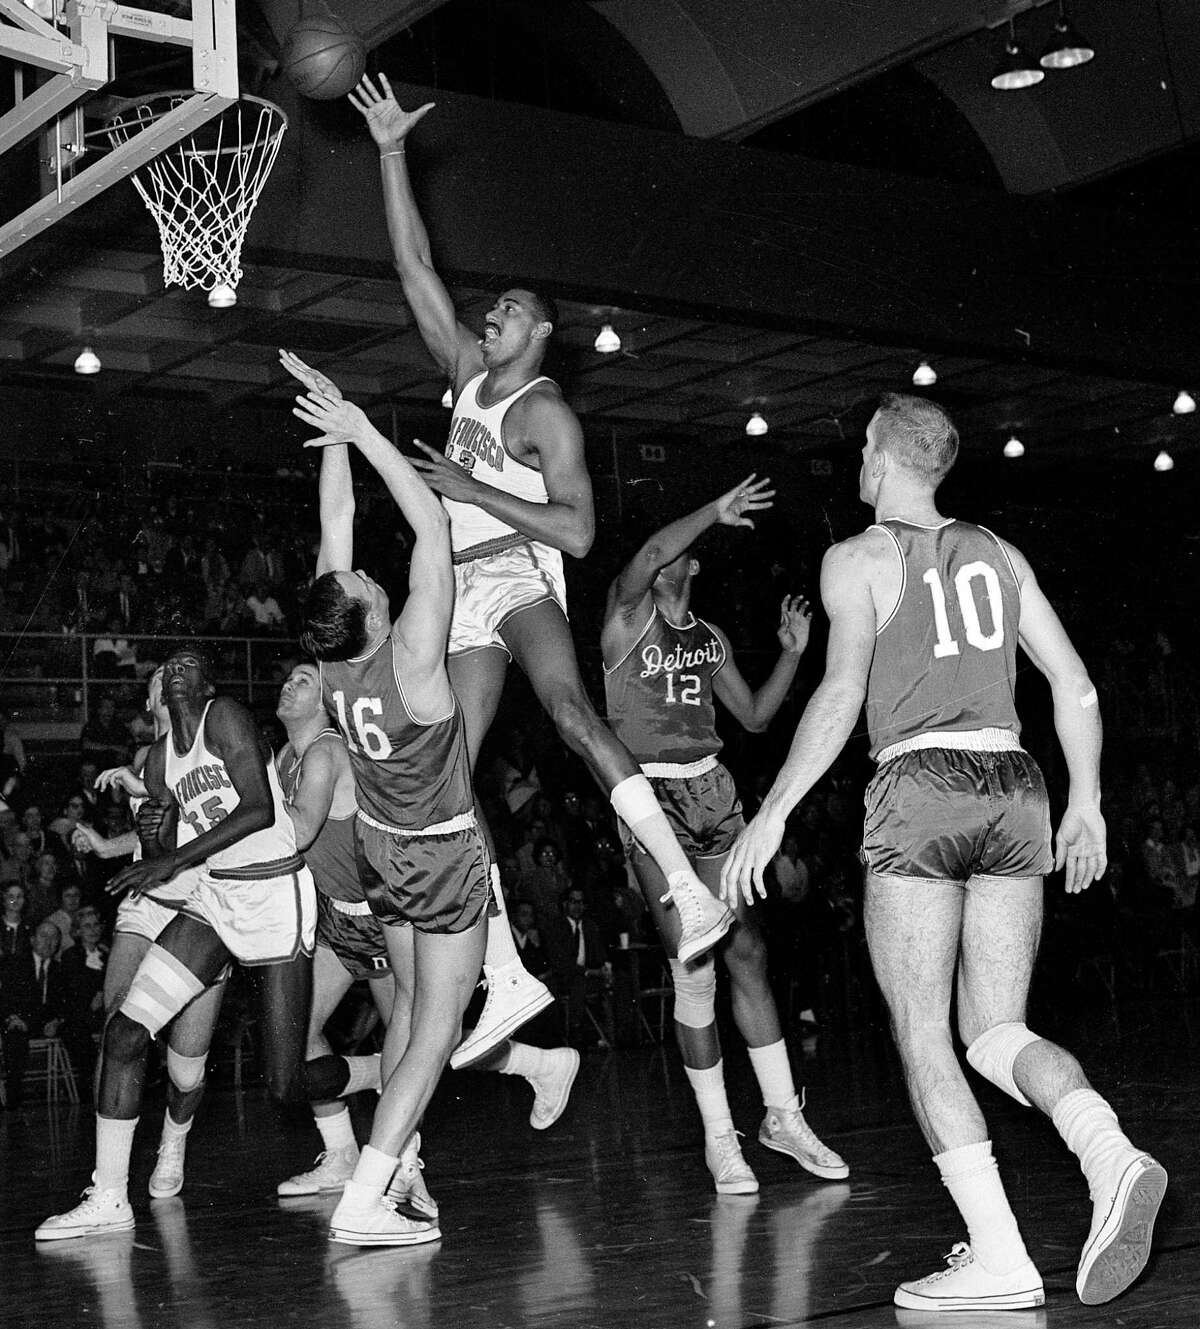 San Francisco Warriors center Wilt Chamberlain plays against the Detroit Pistons in 1964. The Warriors averaged just over 2,000 fans per game that season.